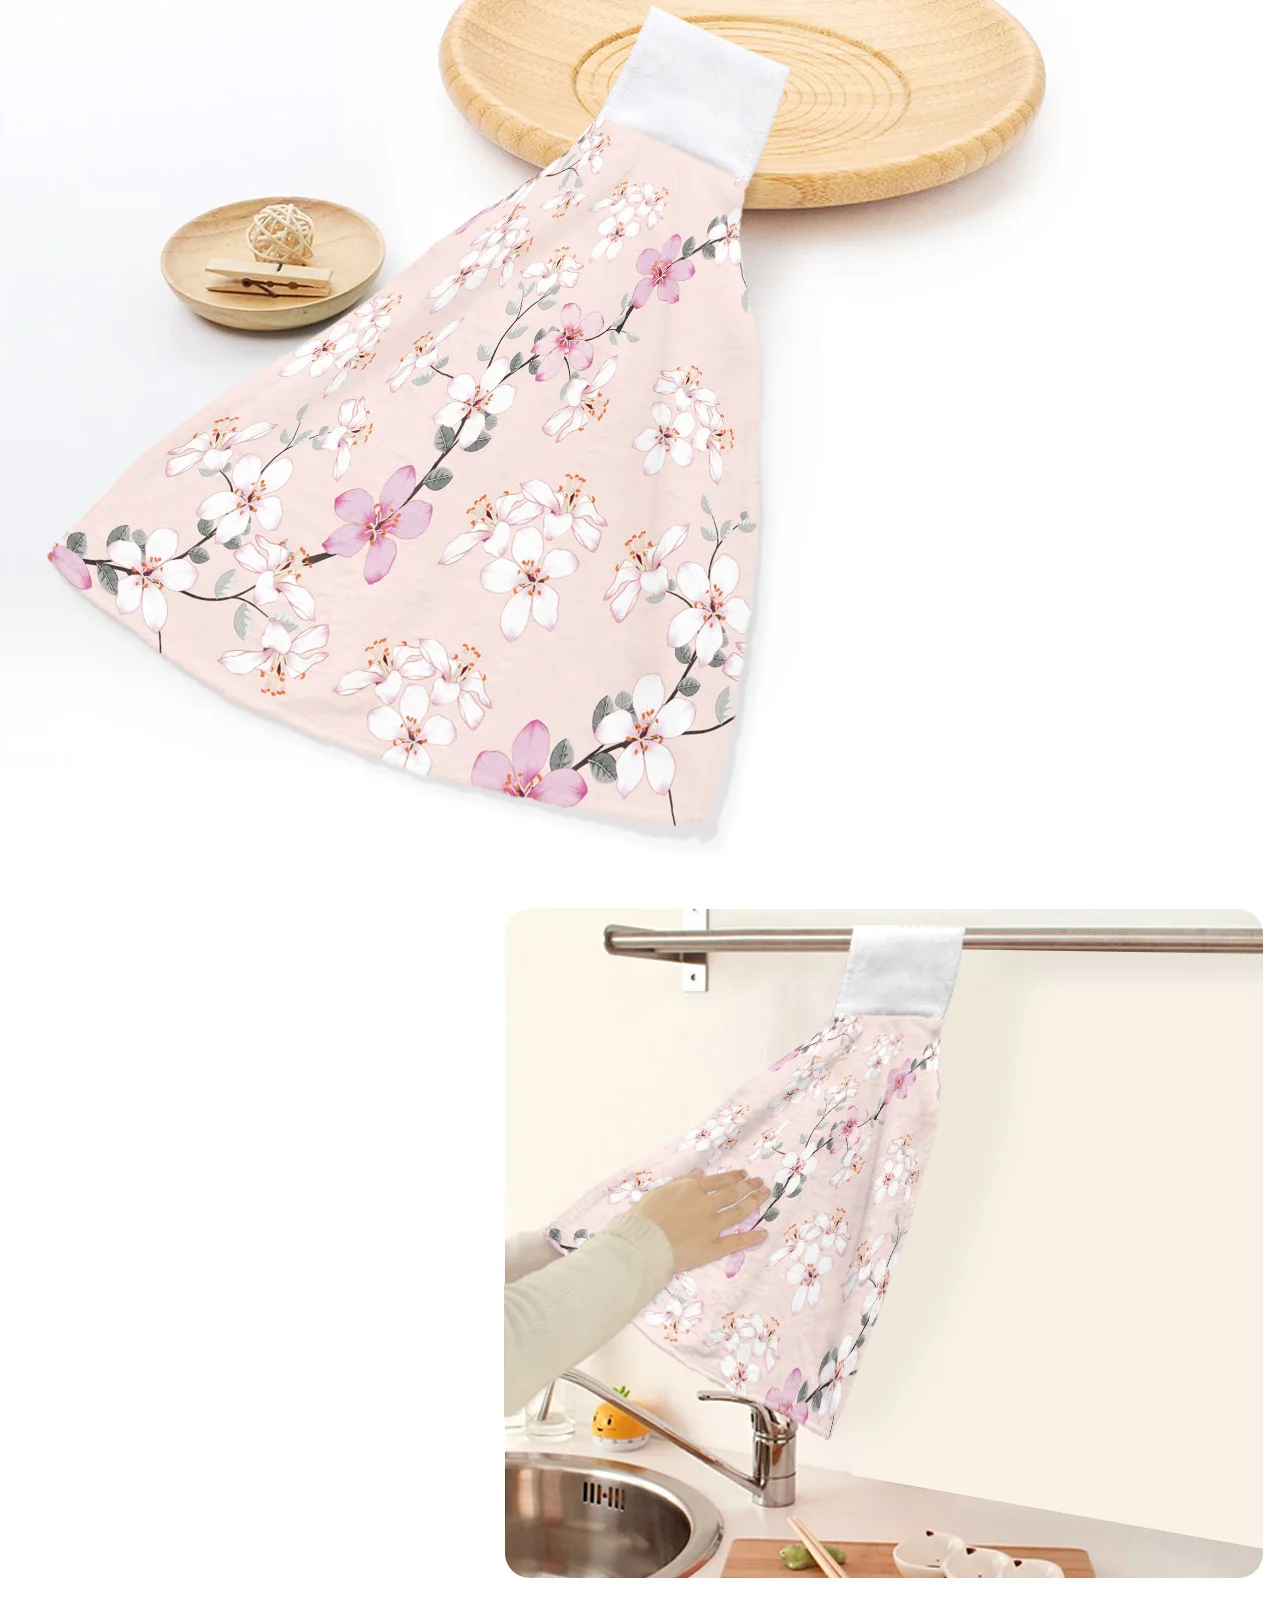 

Pink Flower Peach Blossom In Spring Hand Towels Home Kitchen Bathroom Hanging Dishcloths Loops Soft Absorbent Custom Wipe Towel